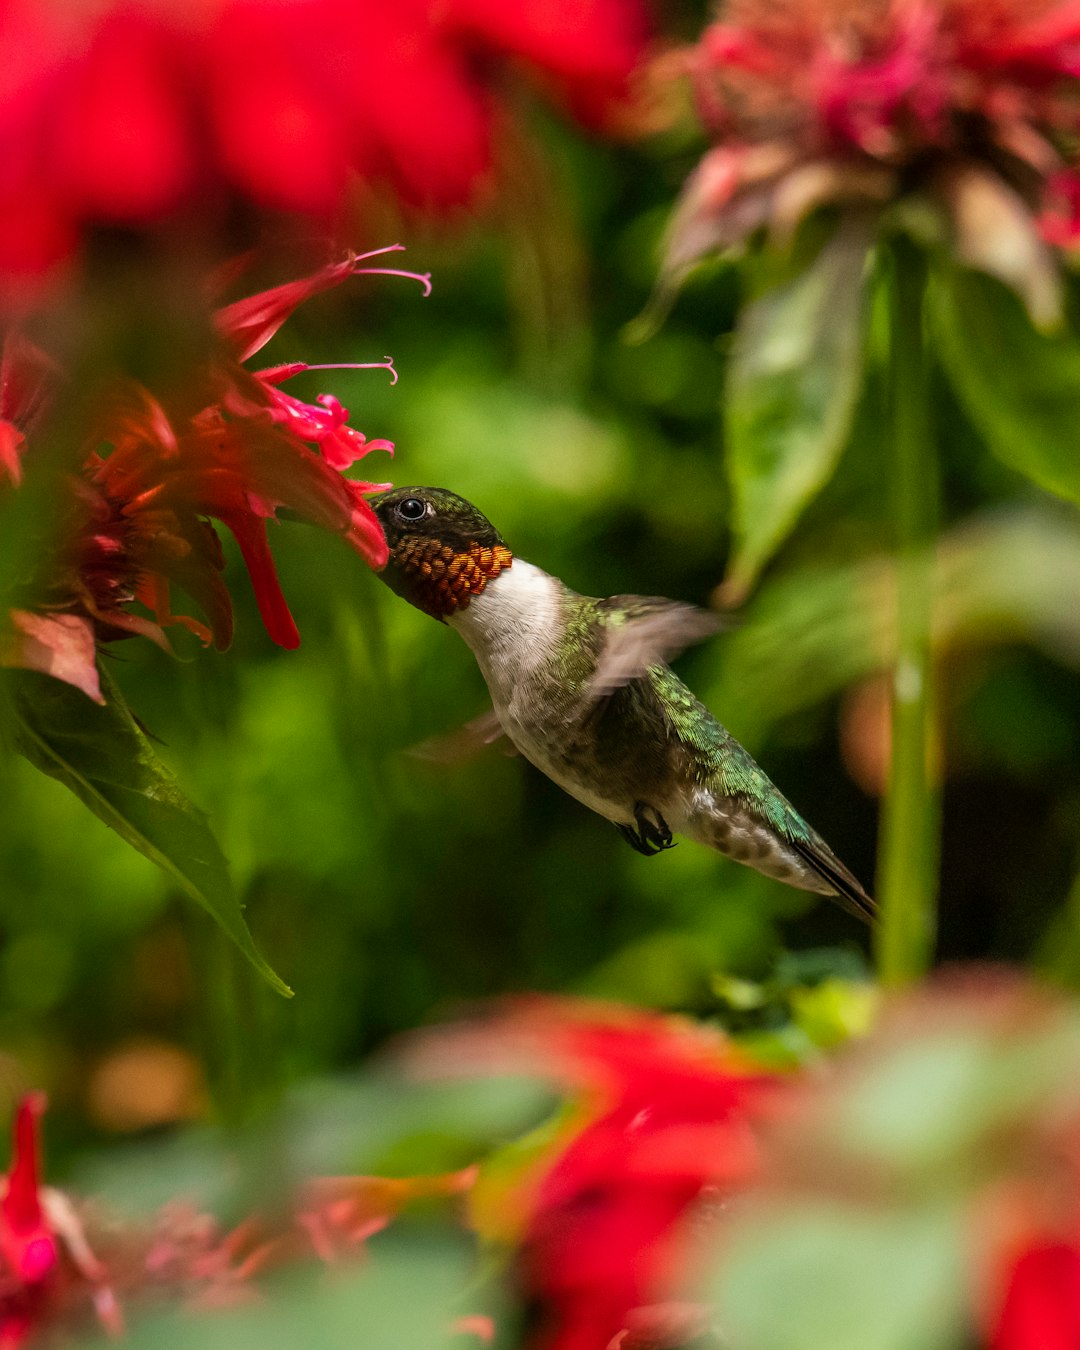 green and black humming bird flying over red flower